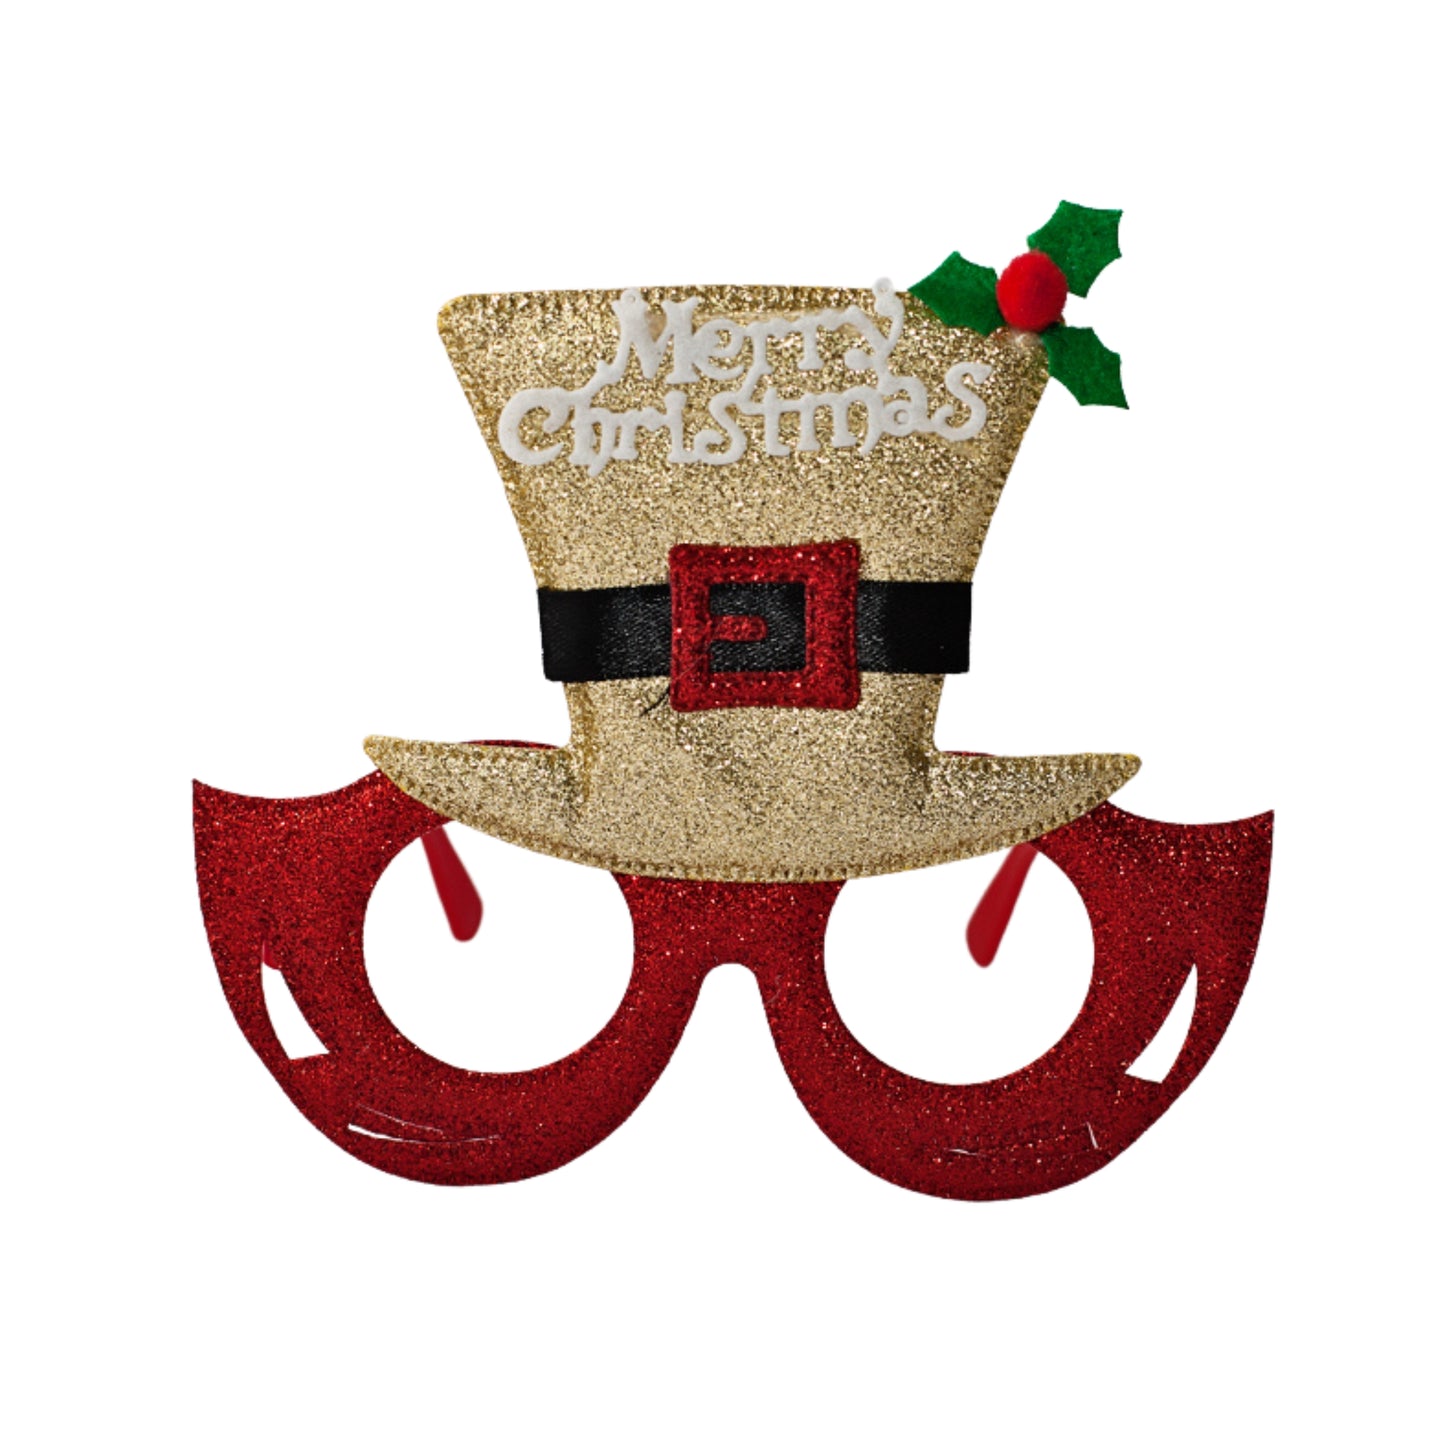 Merry Christmas Glasses - Red